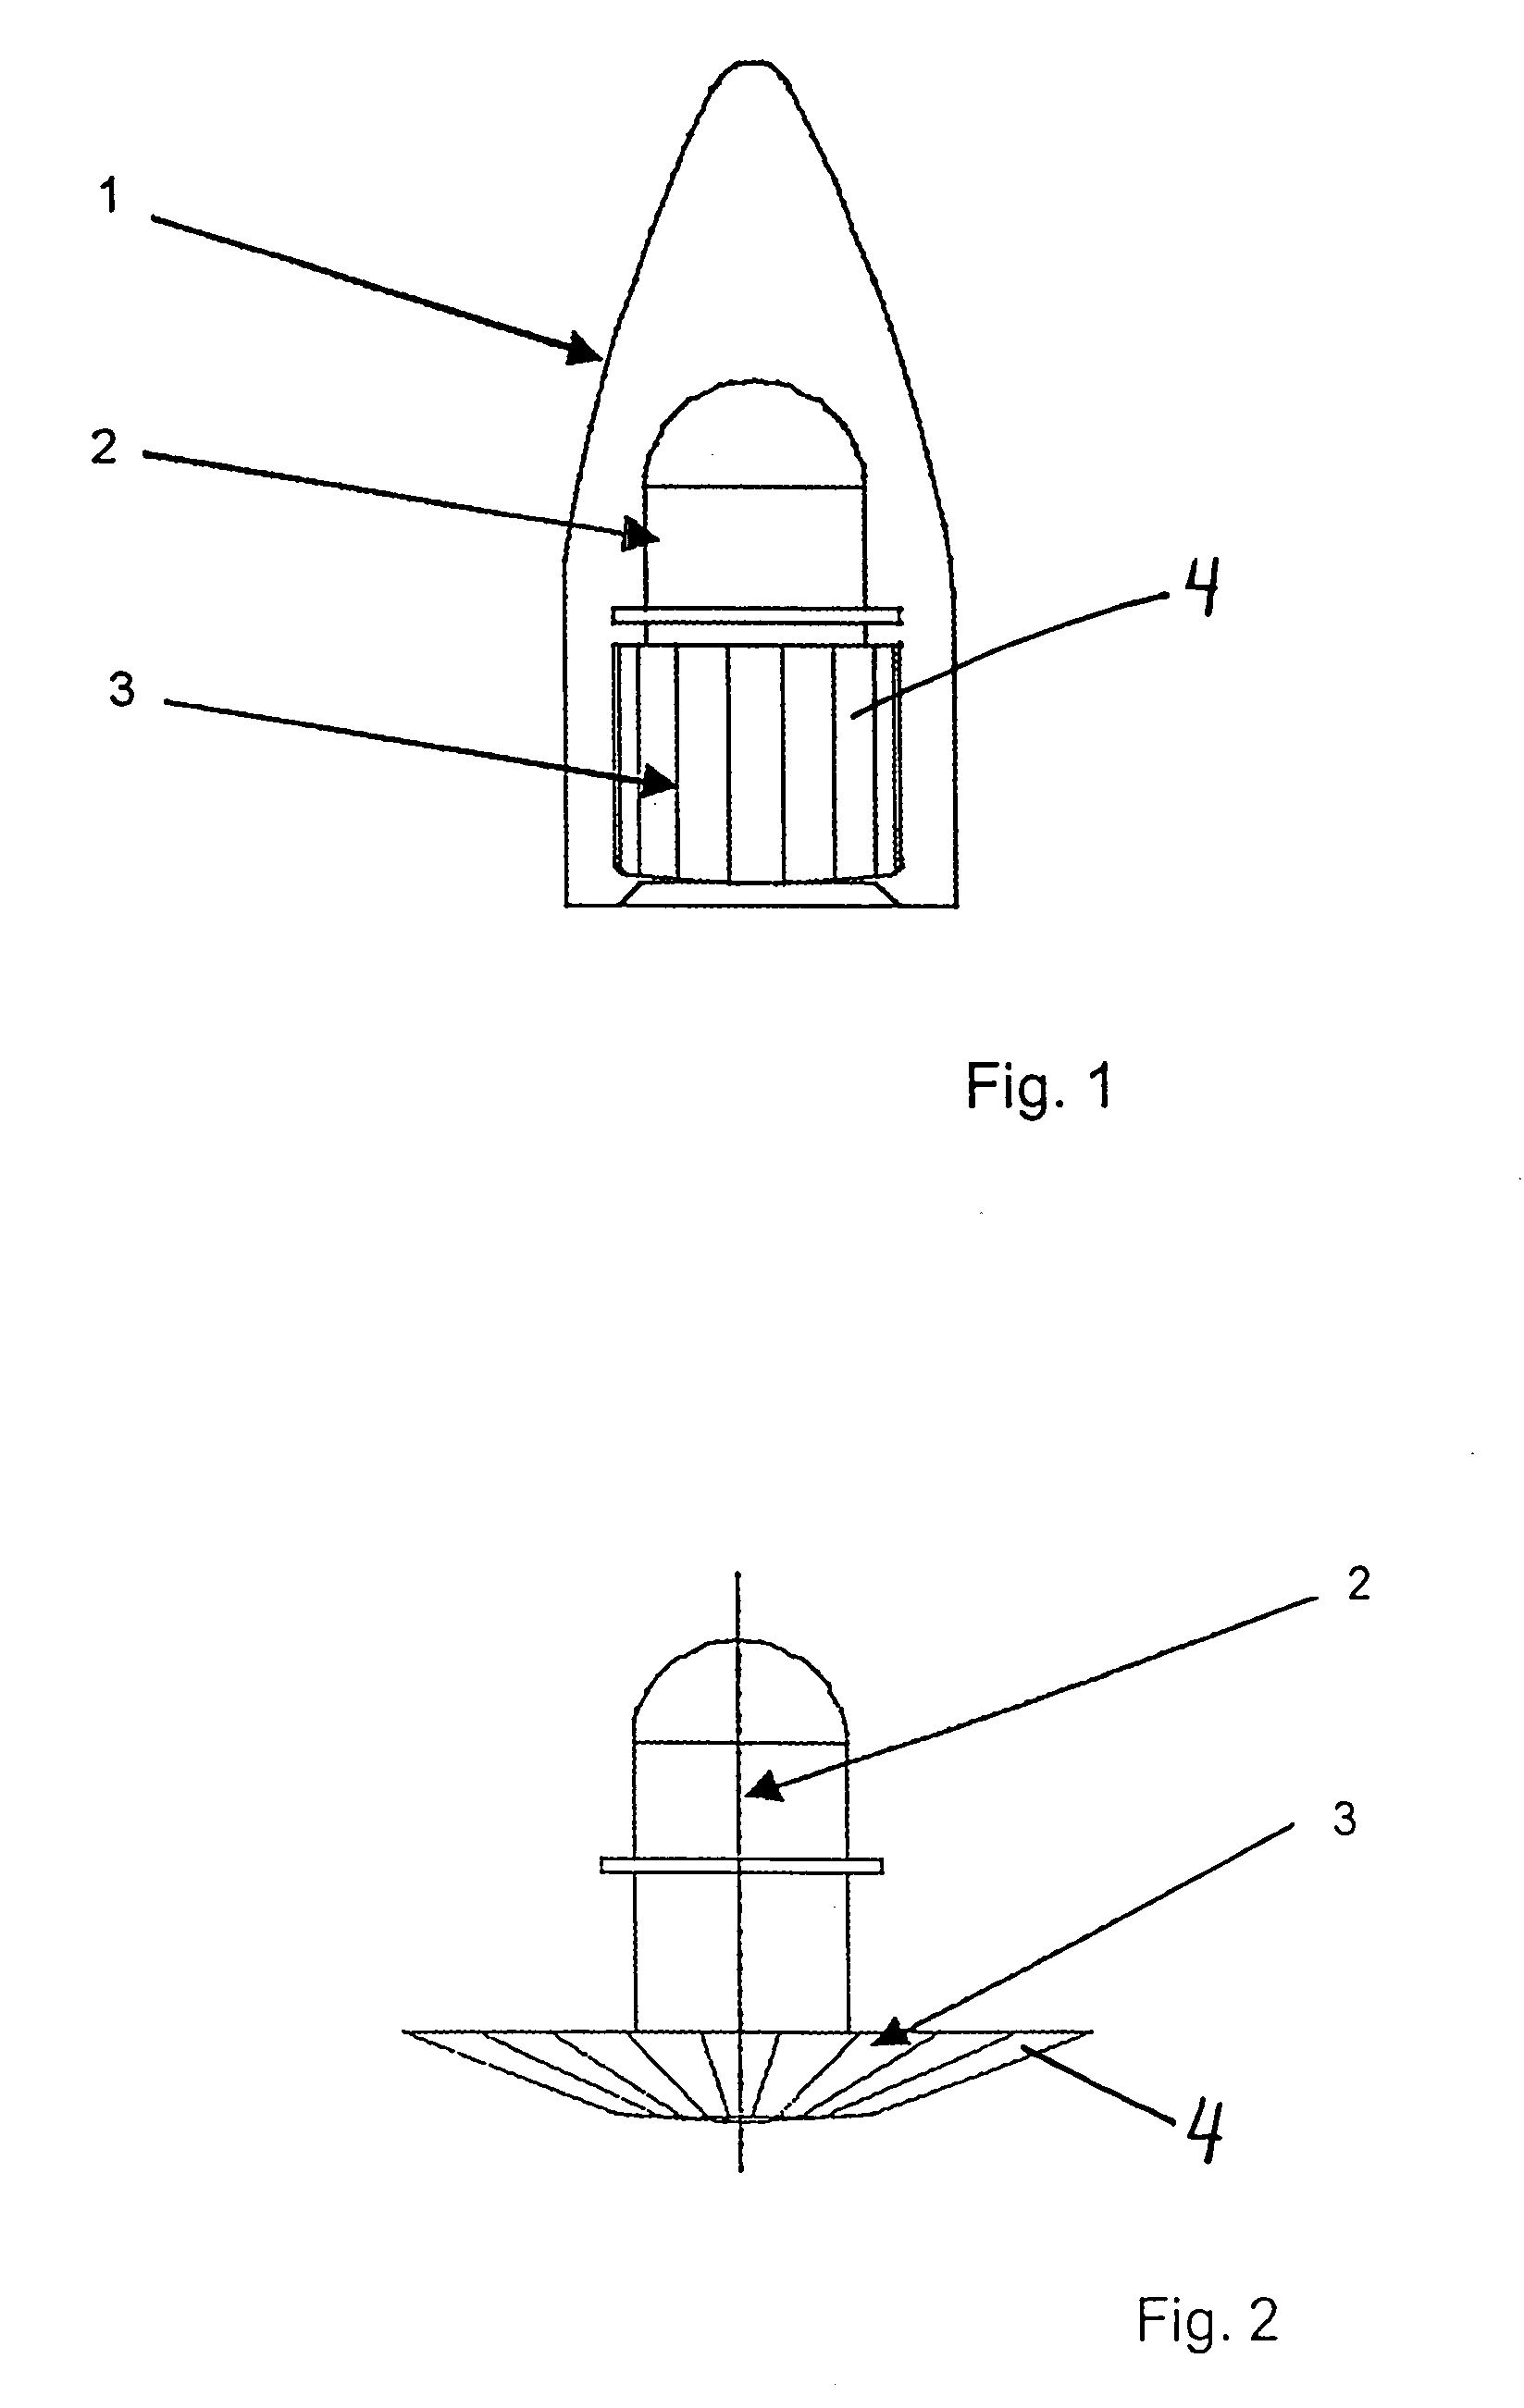 Deployable heat shield and deceleration structure for spacecraft